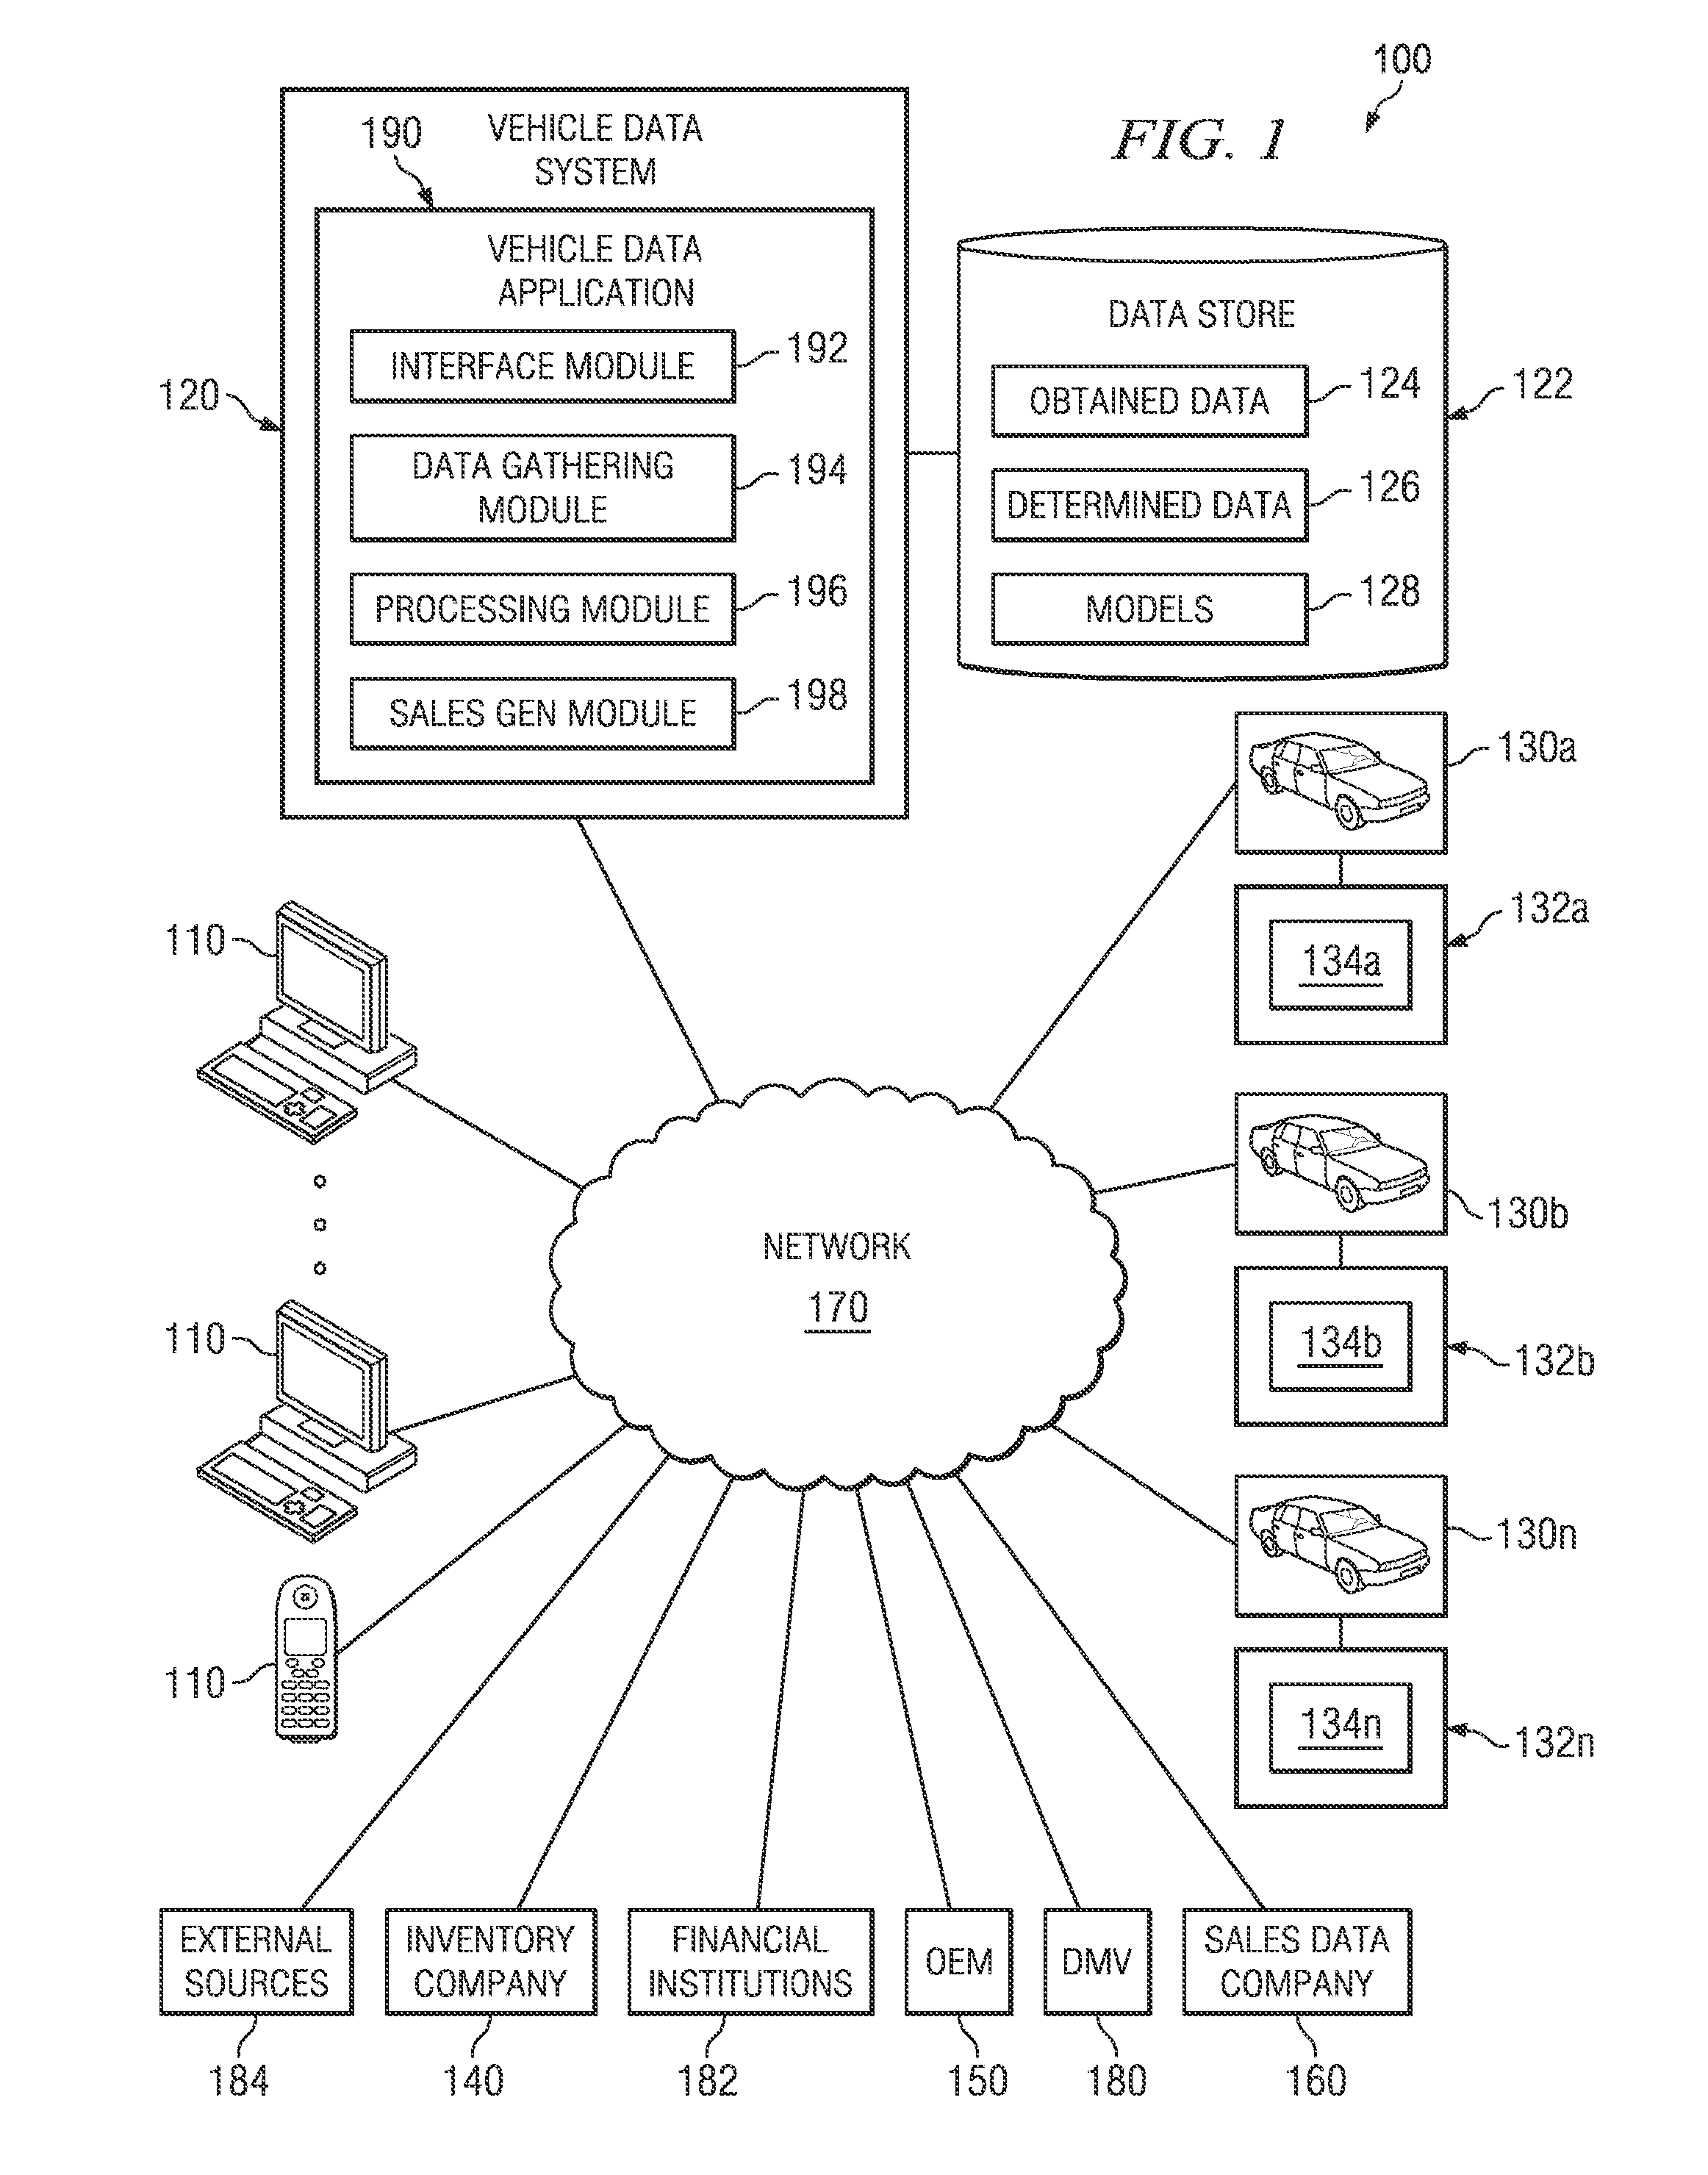 Systems and methods for transformation of raw data to actionable data